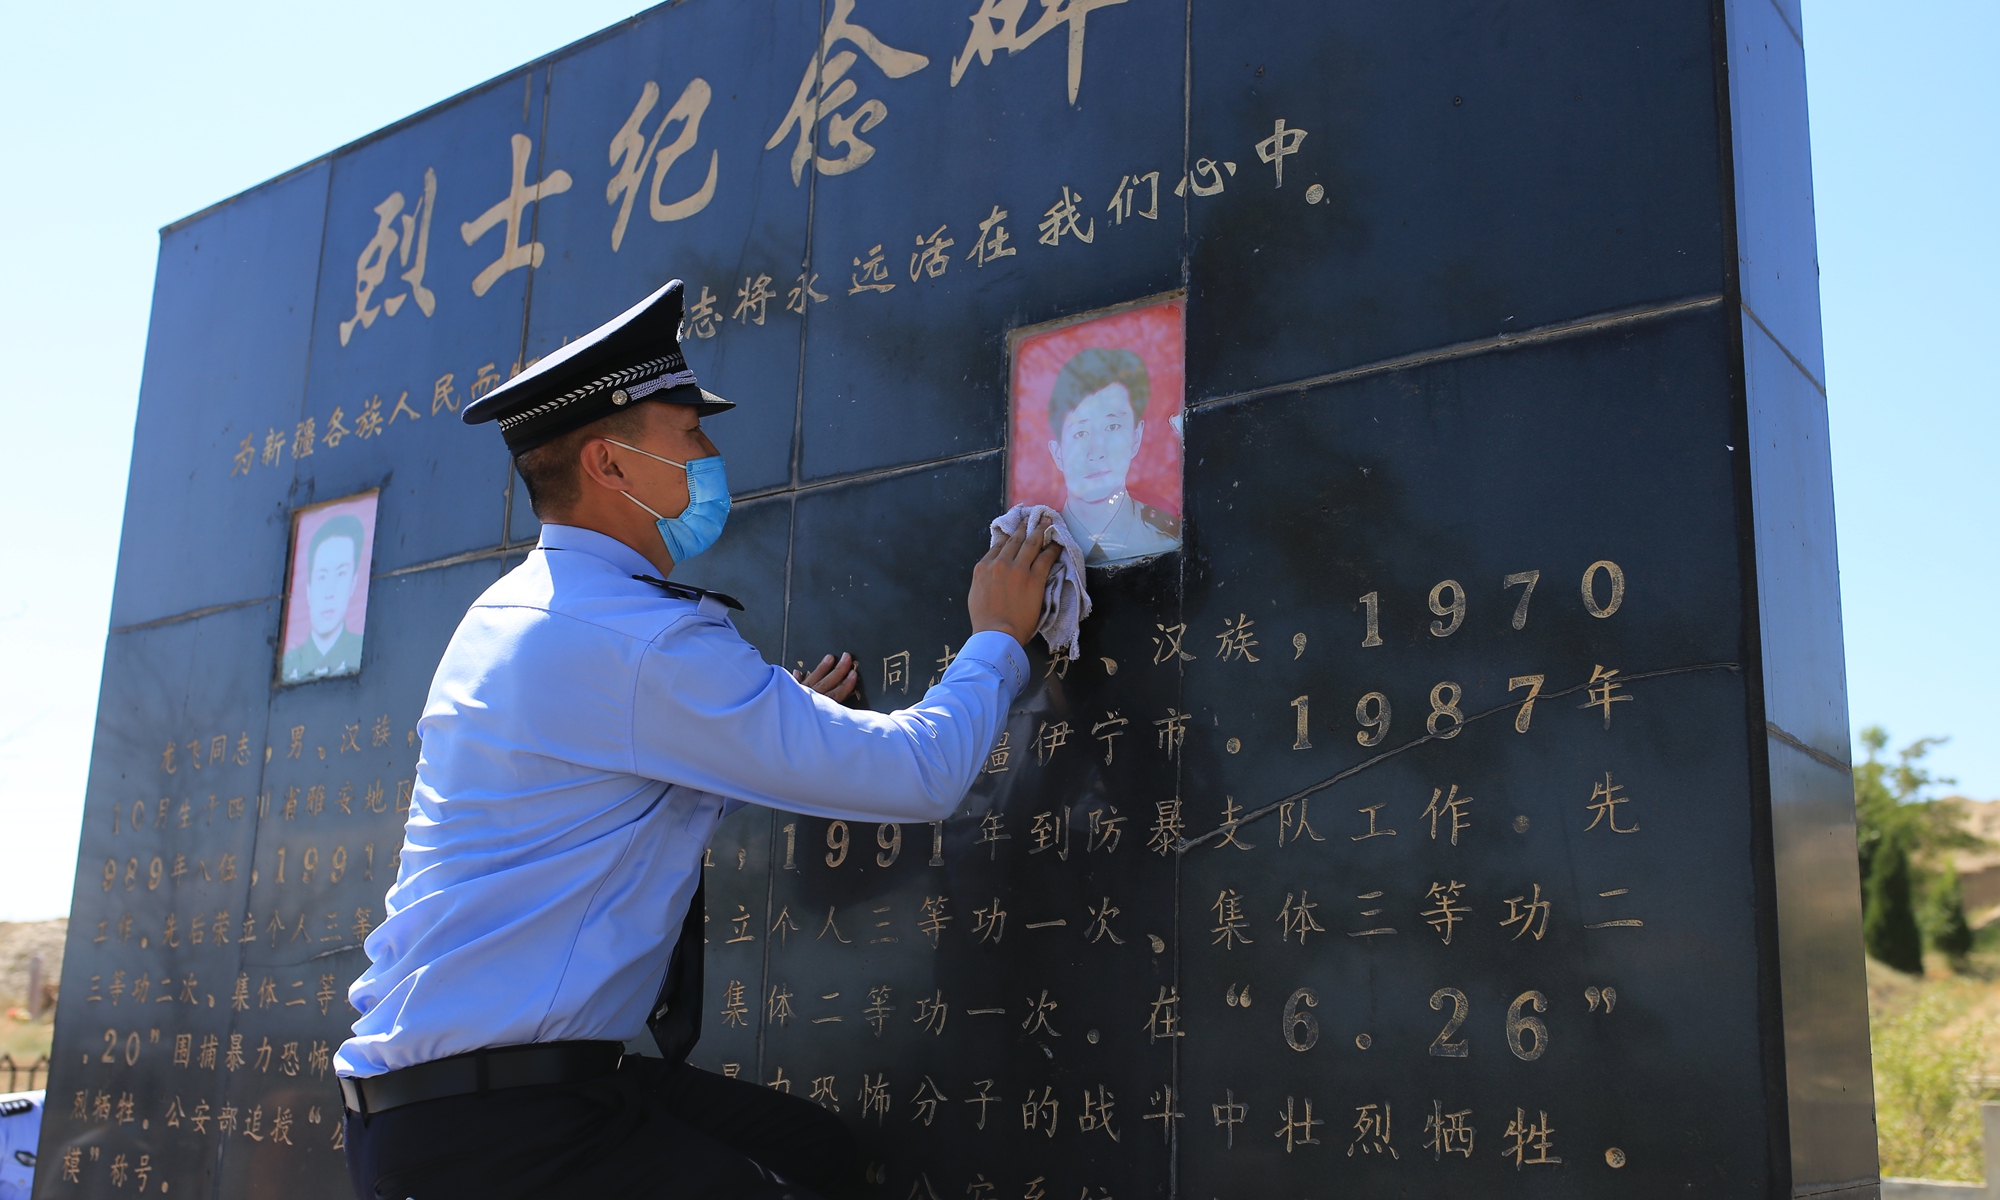 A police officer wipes the memorial stone for Long Fei and Kong Yongqiang.